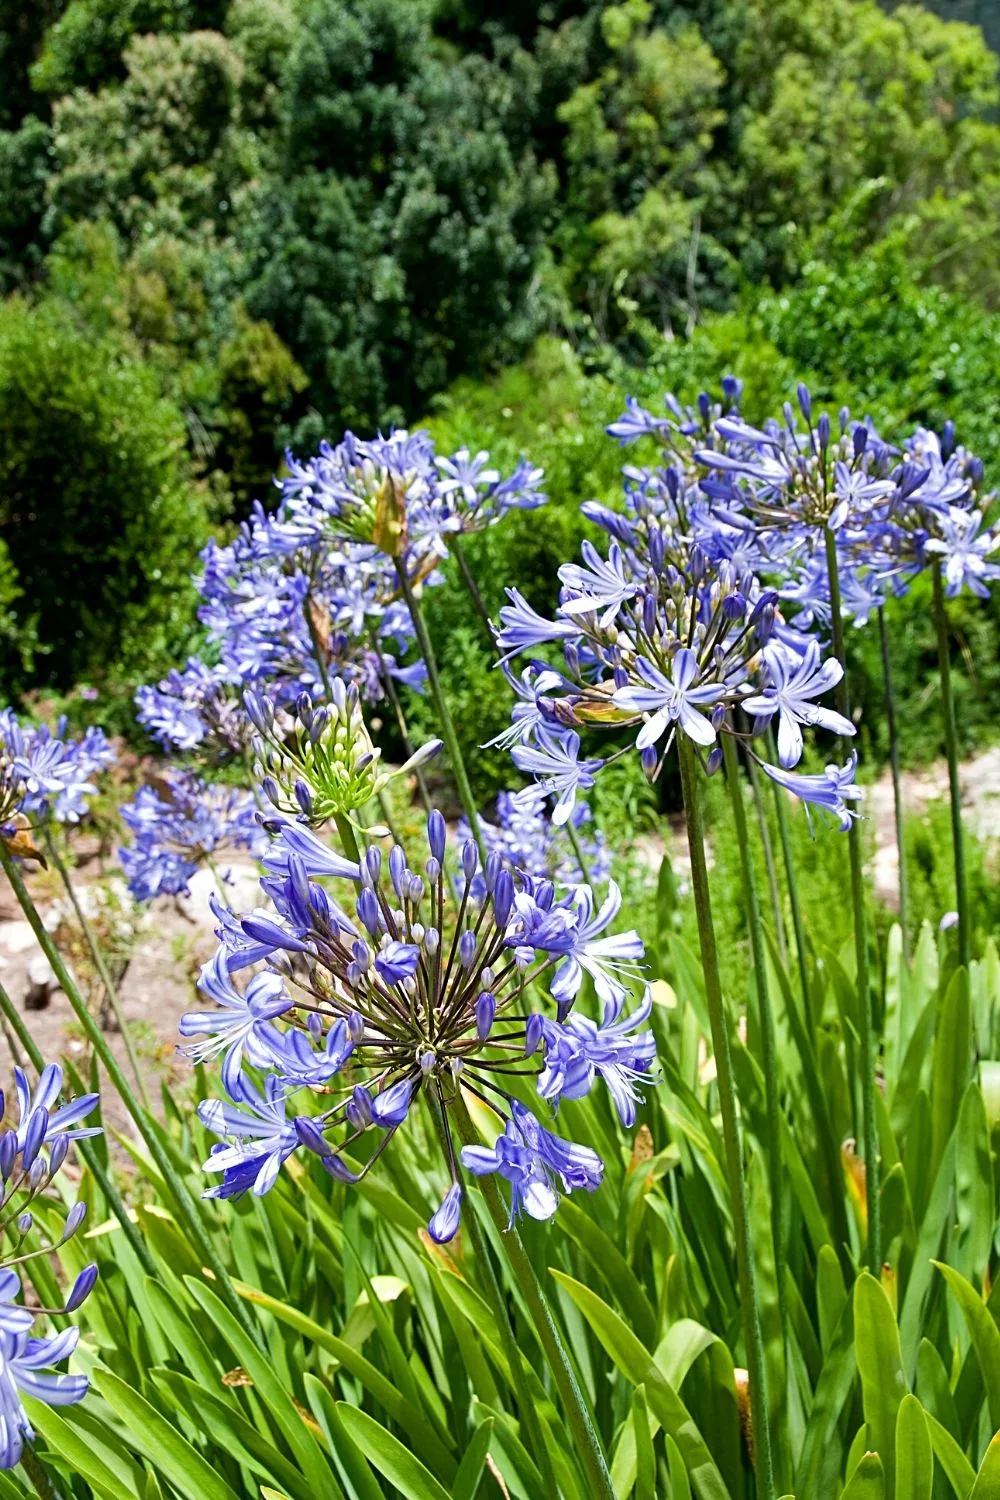 Though it takes 2 years for the Agapanthus to reach its maximum size, it's worth the wait once they start blooming in your northeast-facing garden